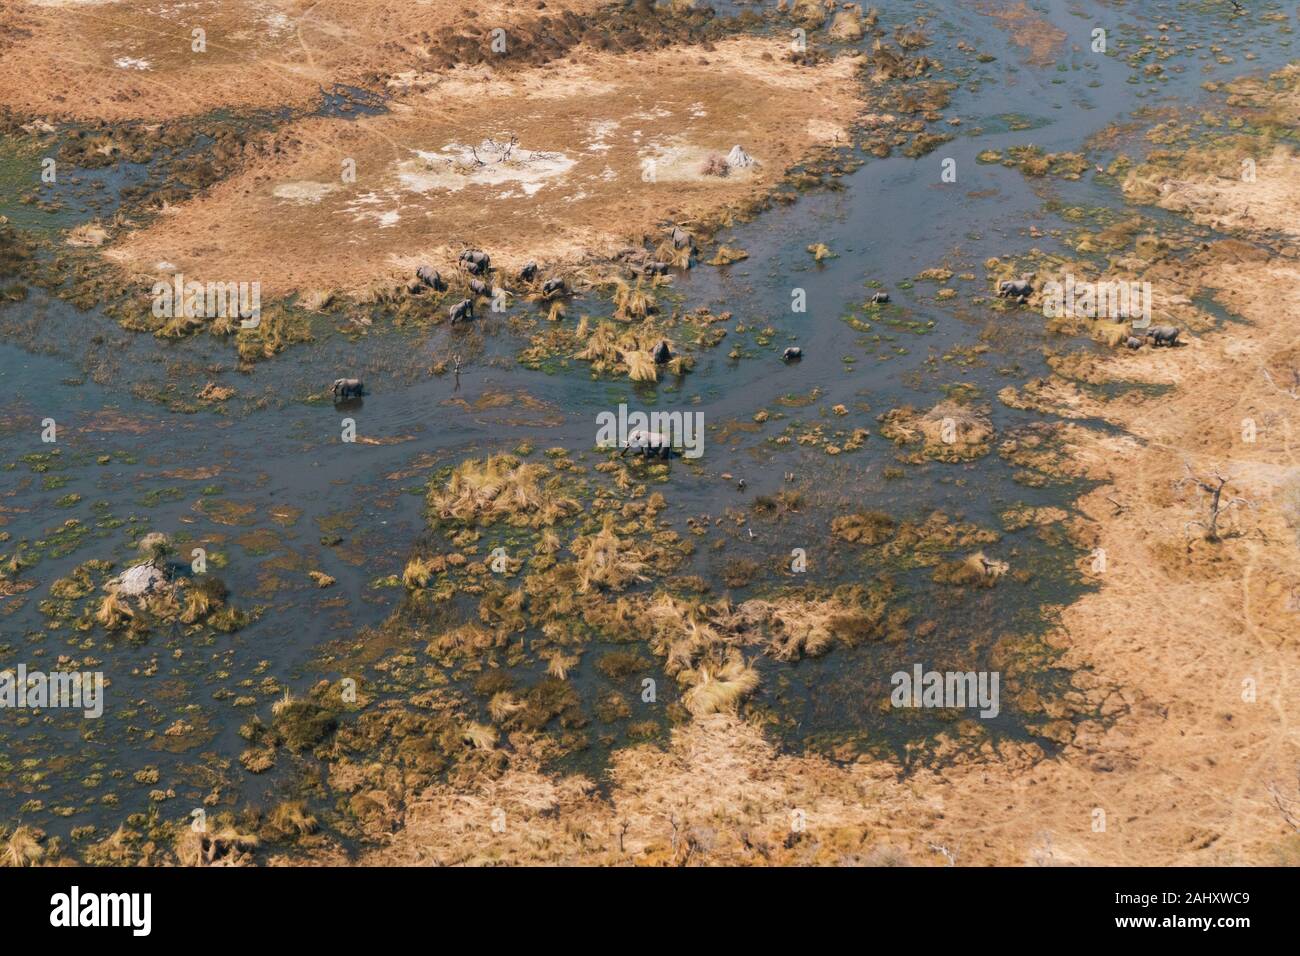 Okavango Delta Aerial with Elephant Herd Grazing in a Swamp or River Surrounded by Arid Land Stock Photo